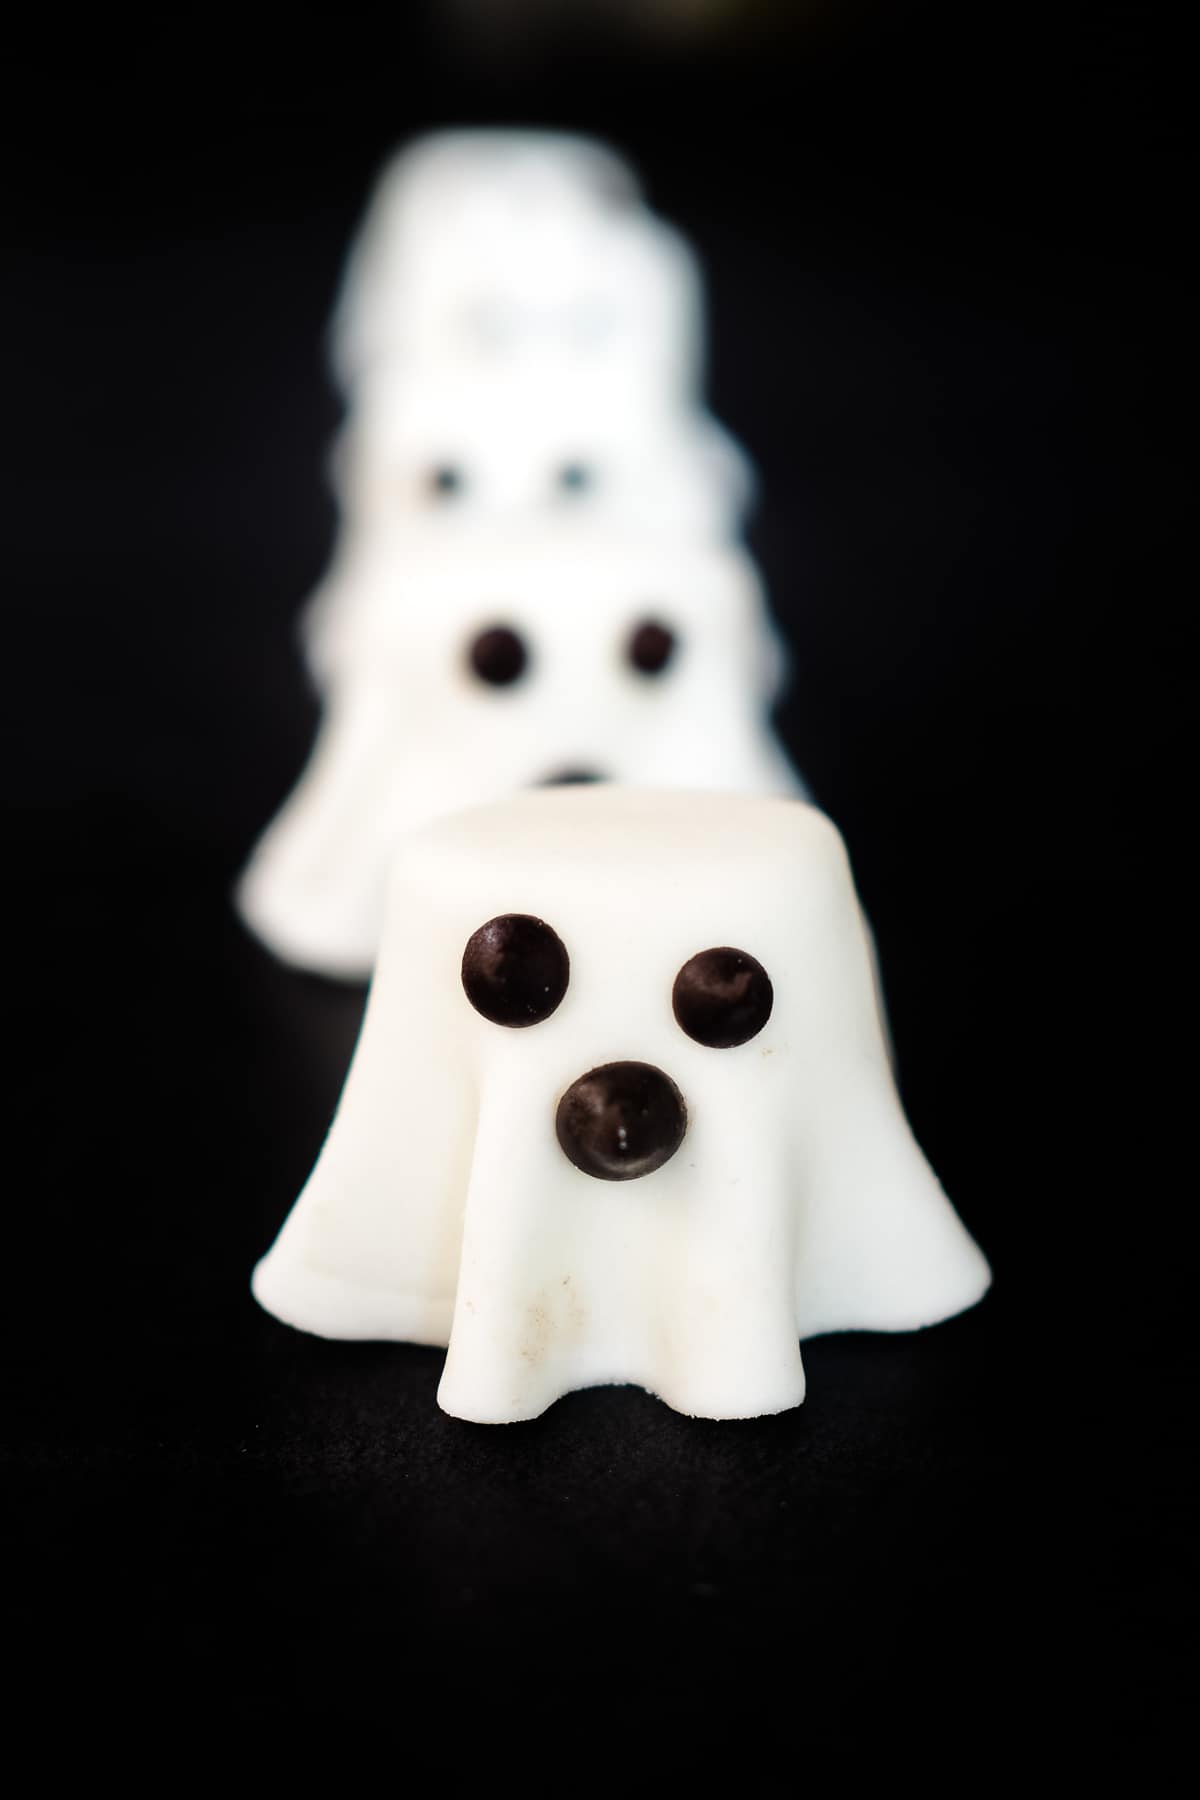 Marshmallow ghosts made of fondant and marshmallow and chocolate chips.